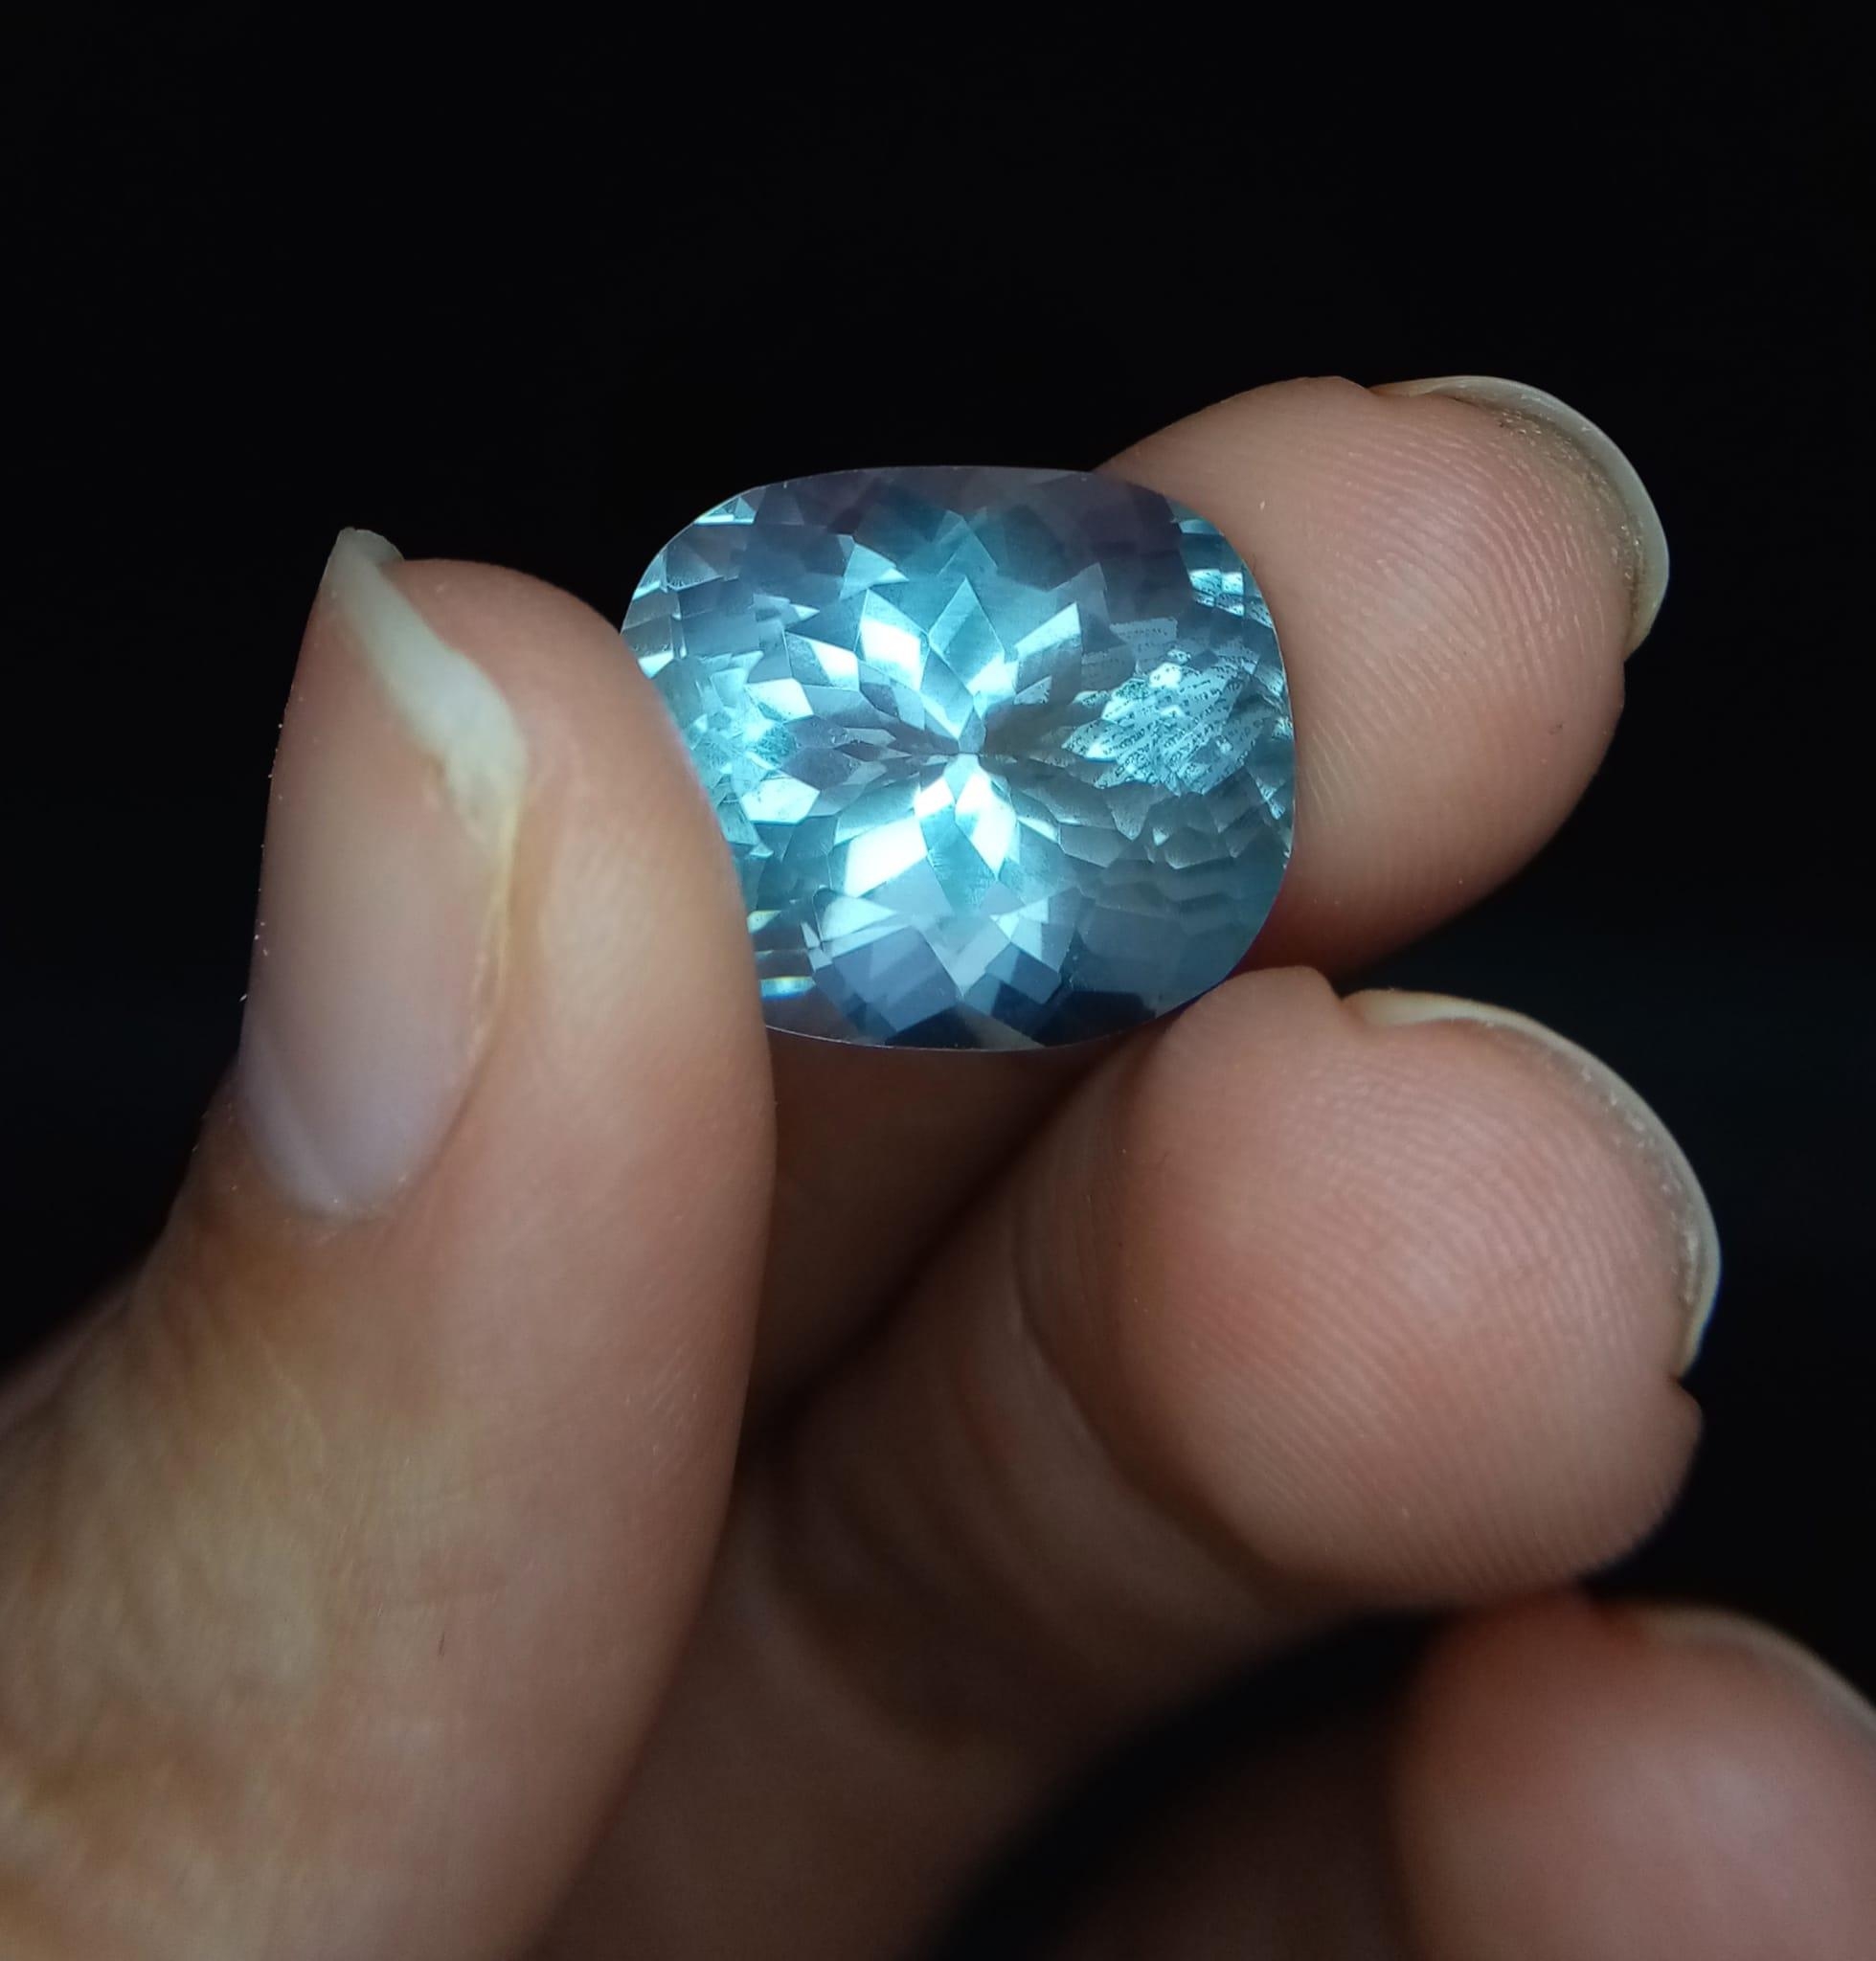 A 20ct Mesmerizing Blue Aquamarine Gemstone. Square -cut with a trillion base. This faceted gem - Image 3 of 4